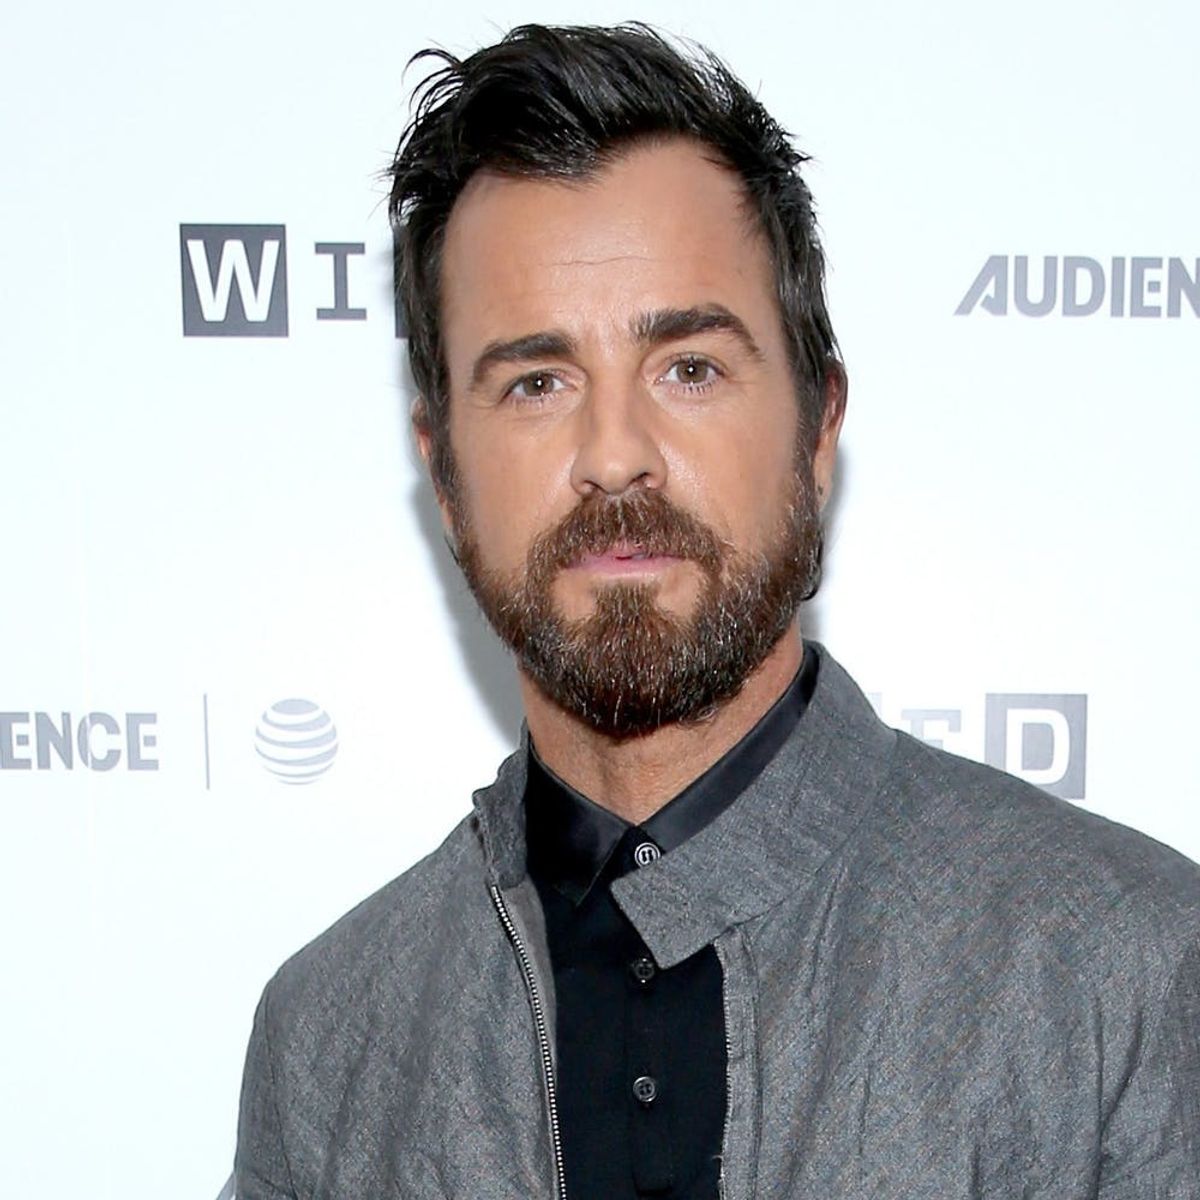 Justin Theroux Reveals He Skipped an Audition for “Friends” and “Slept in” Instead